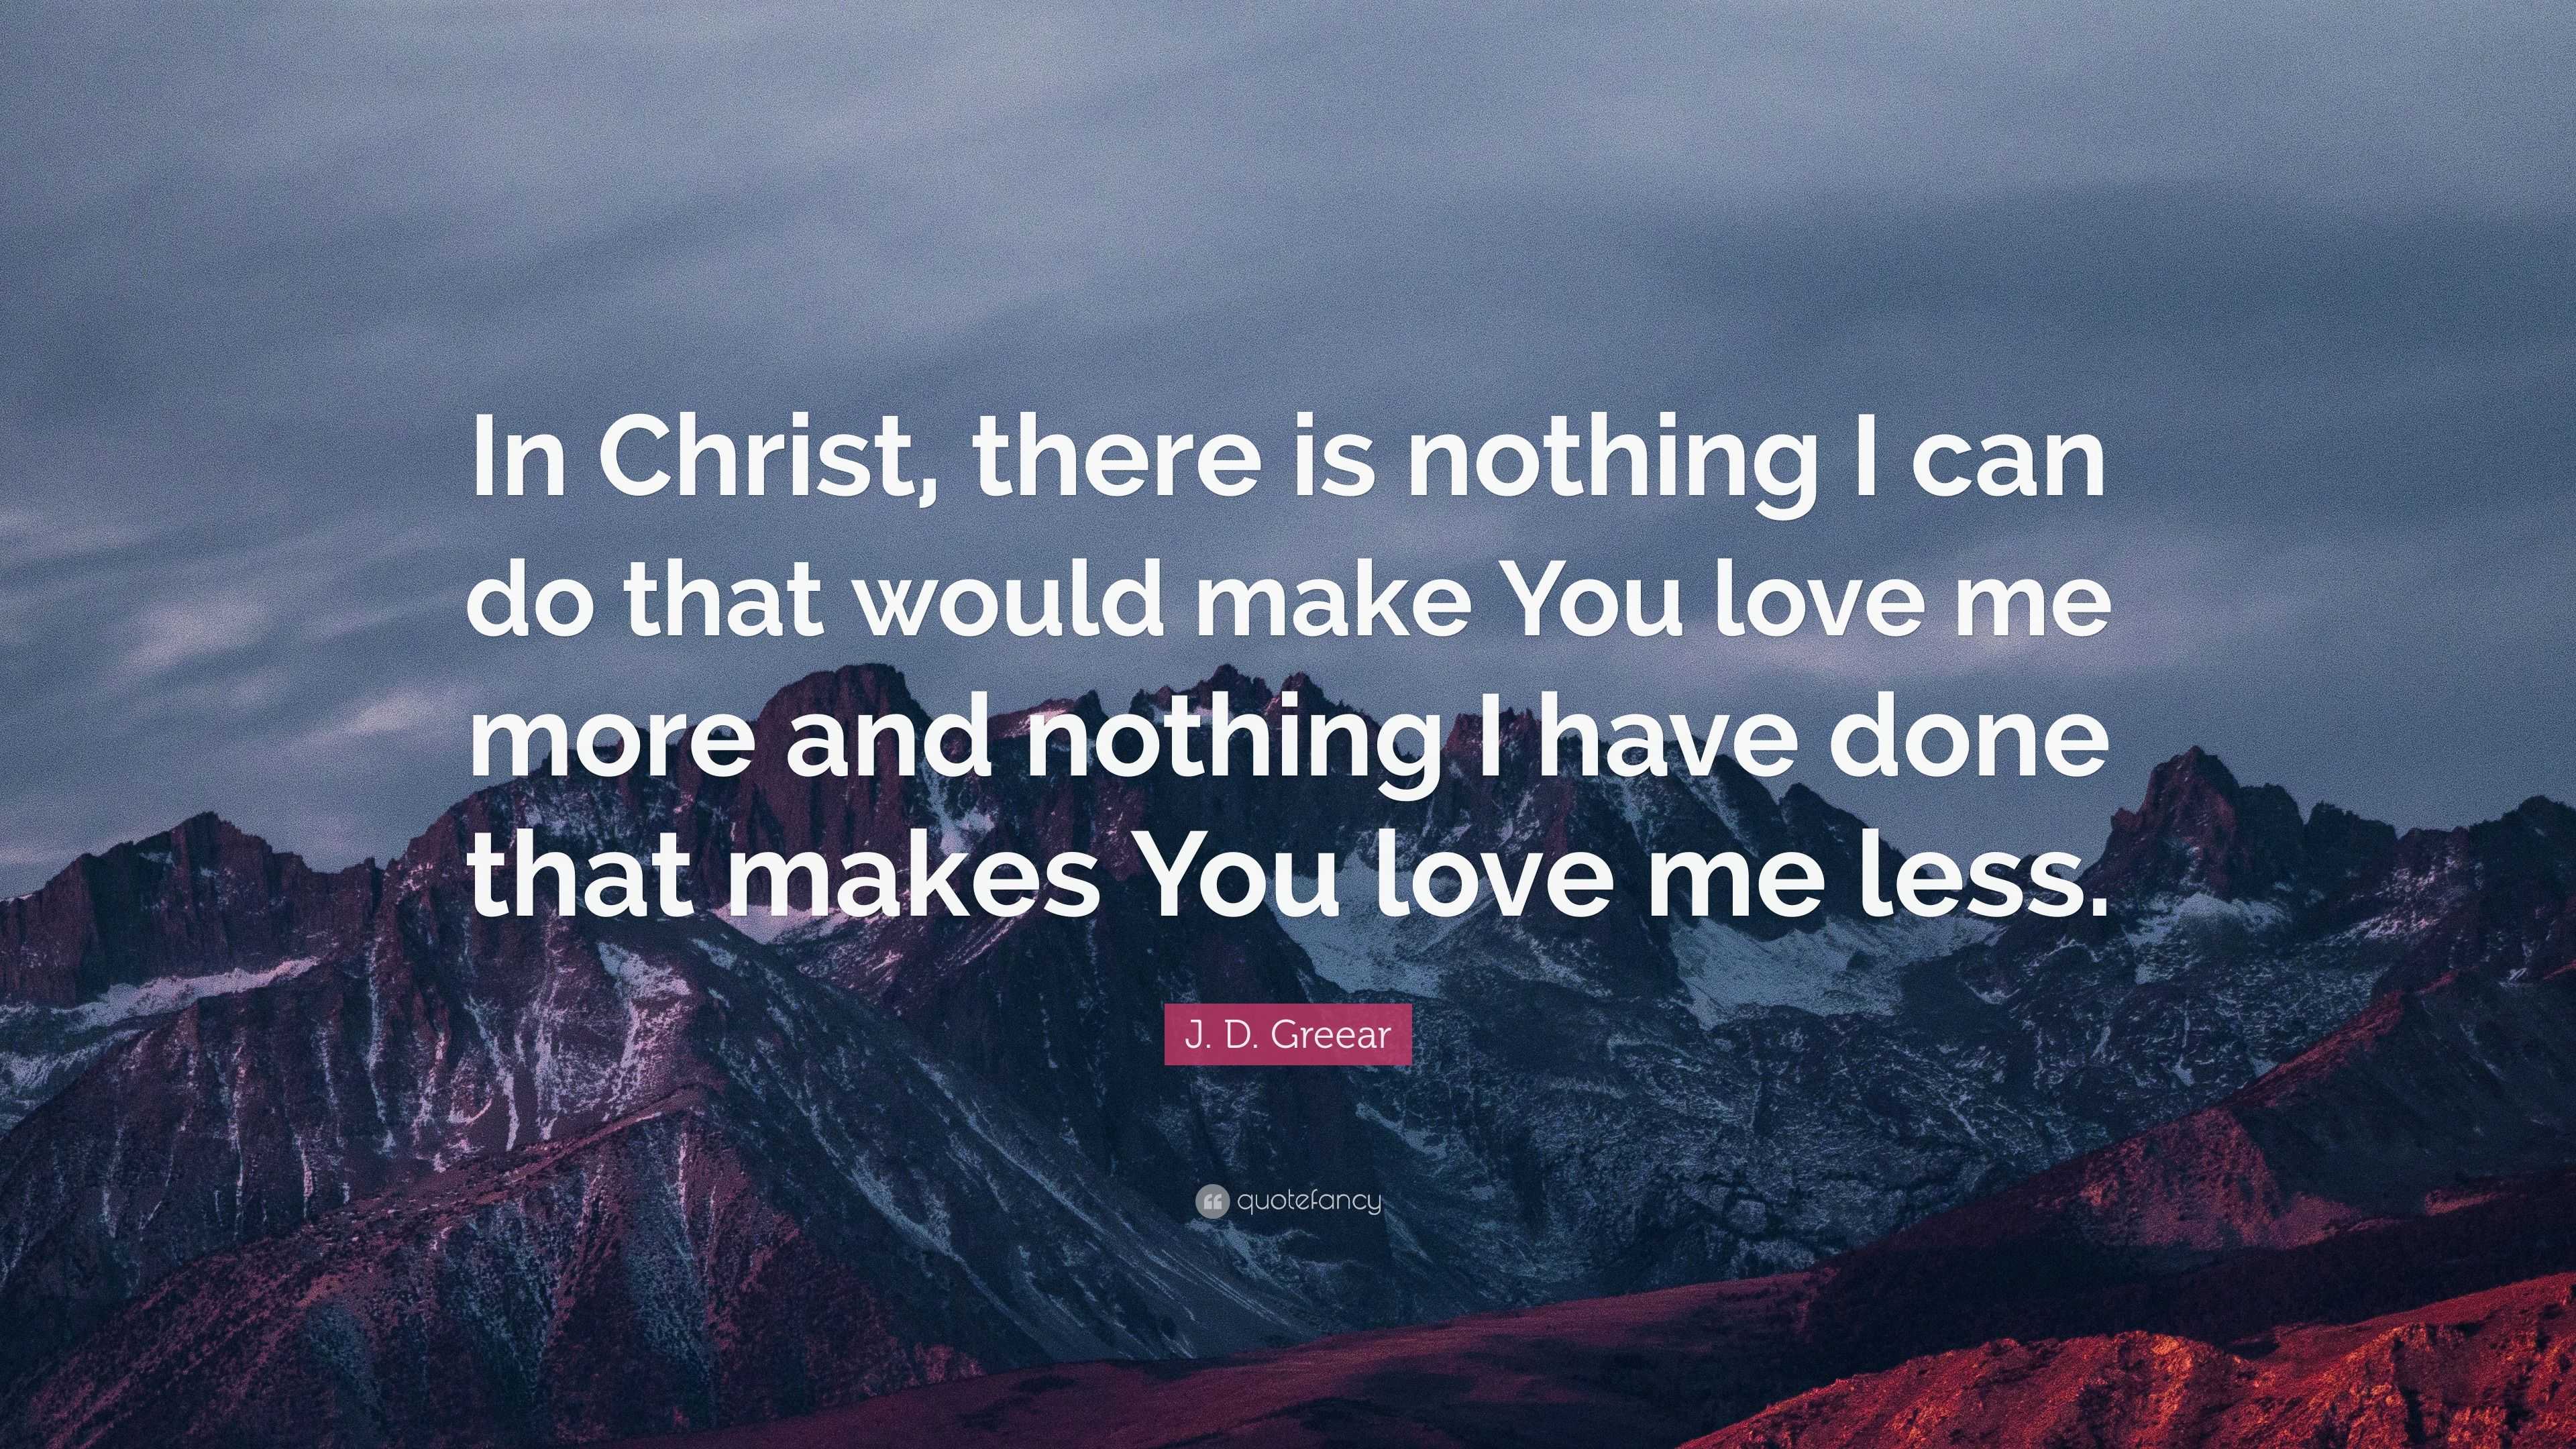 J D Greear Quote “In Christ there is nothing I can do that would